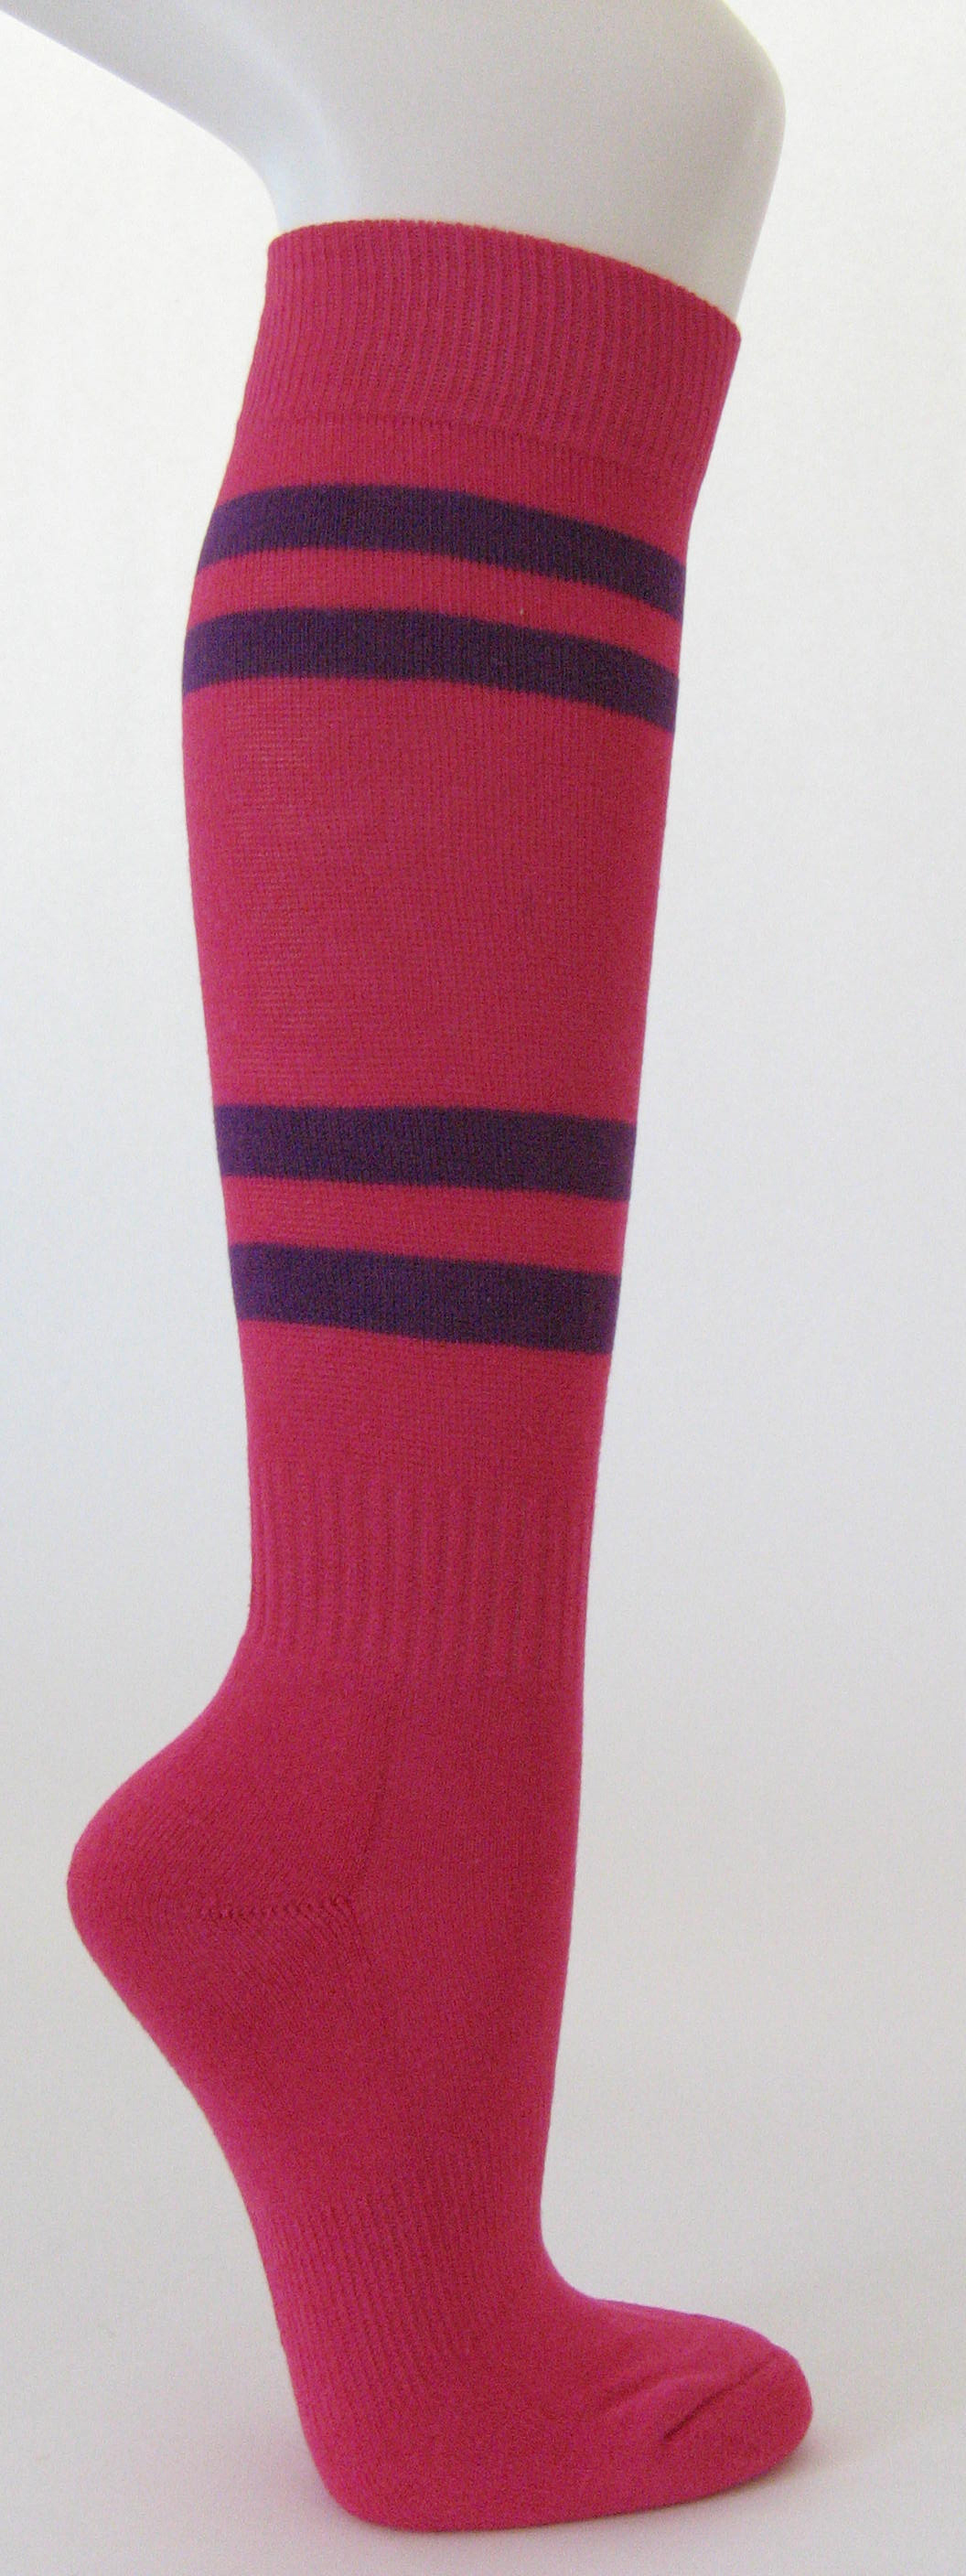 Hot pink cotton knee socks with purple stripes - Click Image to Close